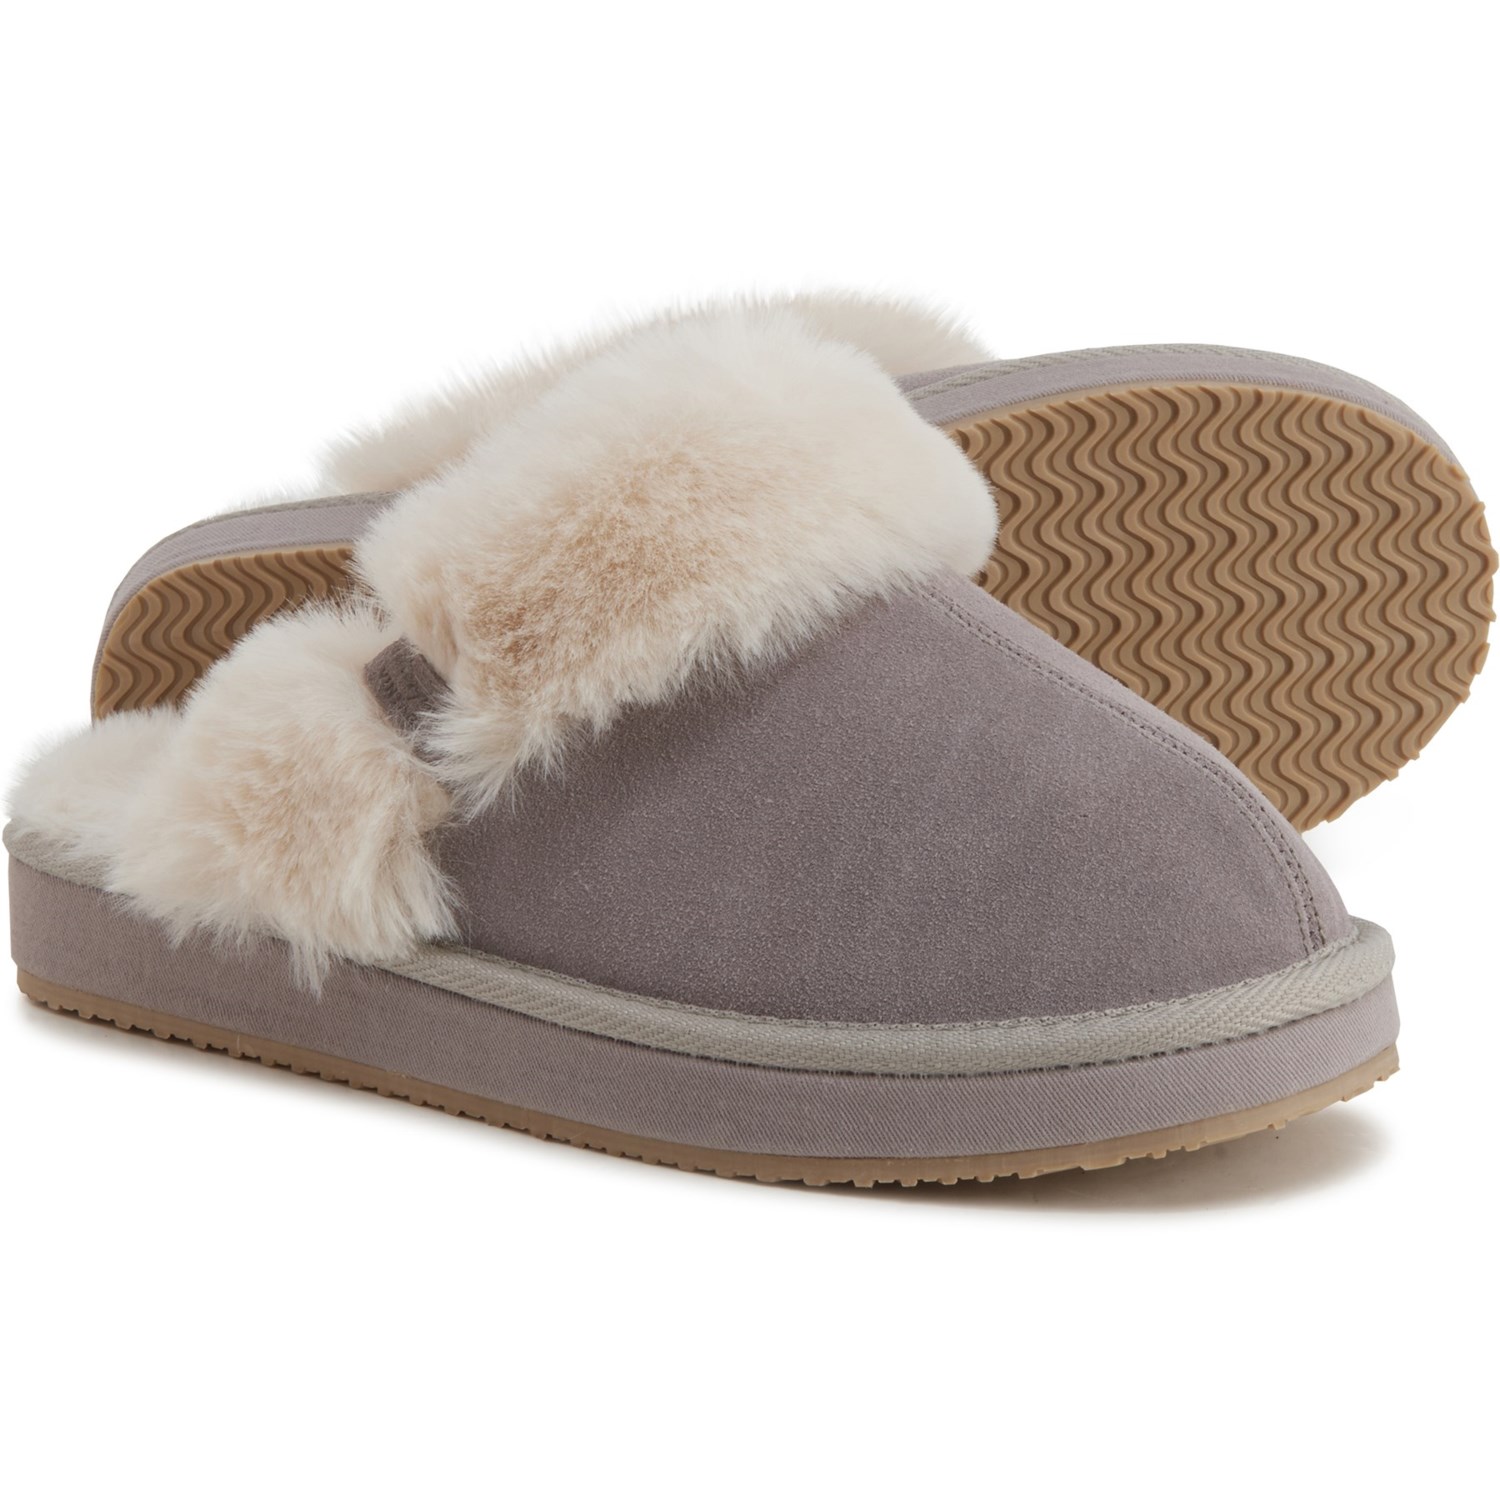 Weatherproof Vintage Scuff Slippers (For Women) - Save 45%